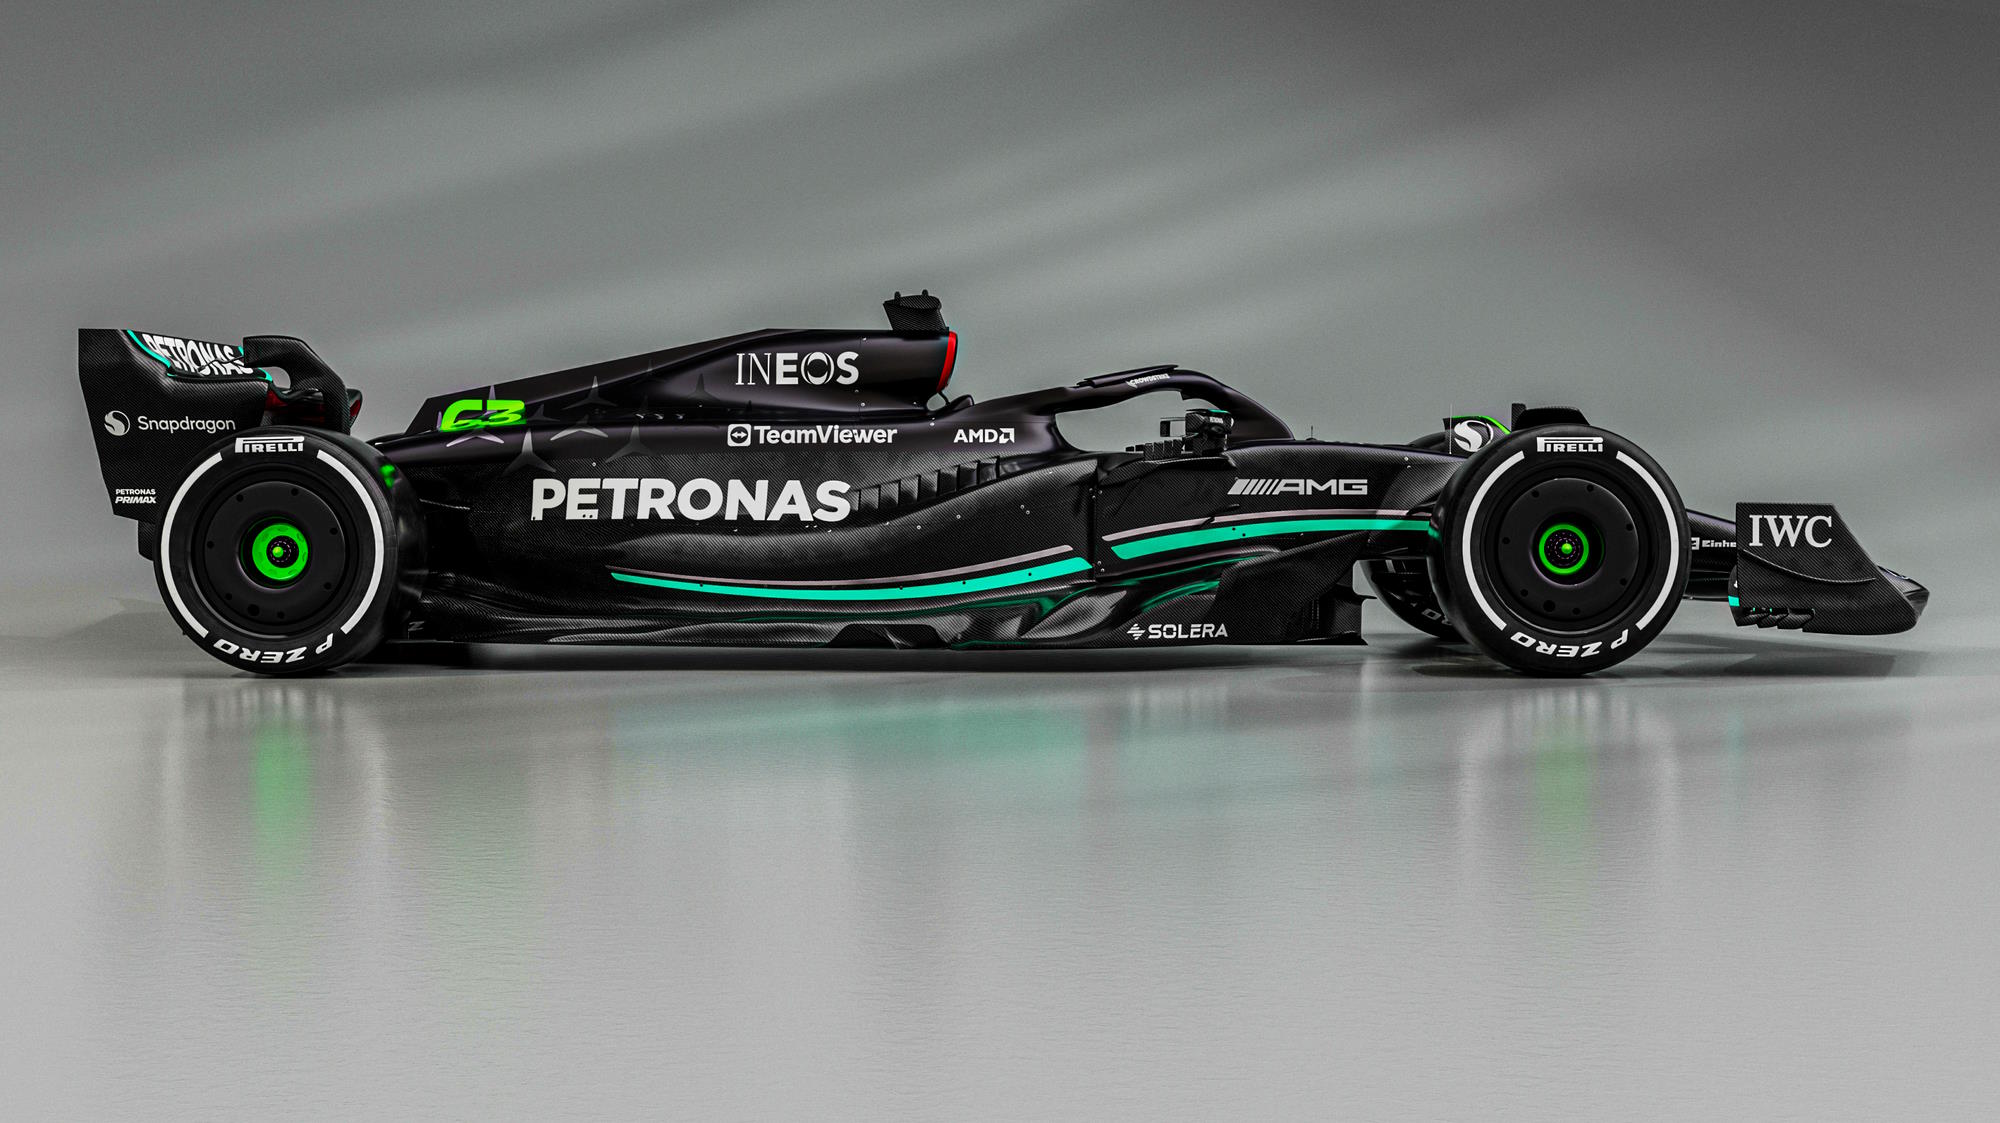 The Art of Speed Why F1 Teams are Shifting to Less Paint on Their Cars